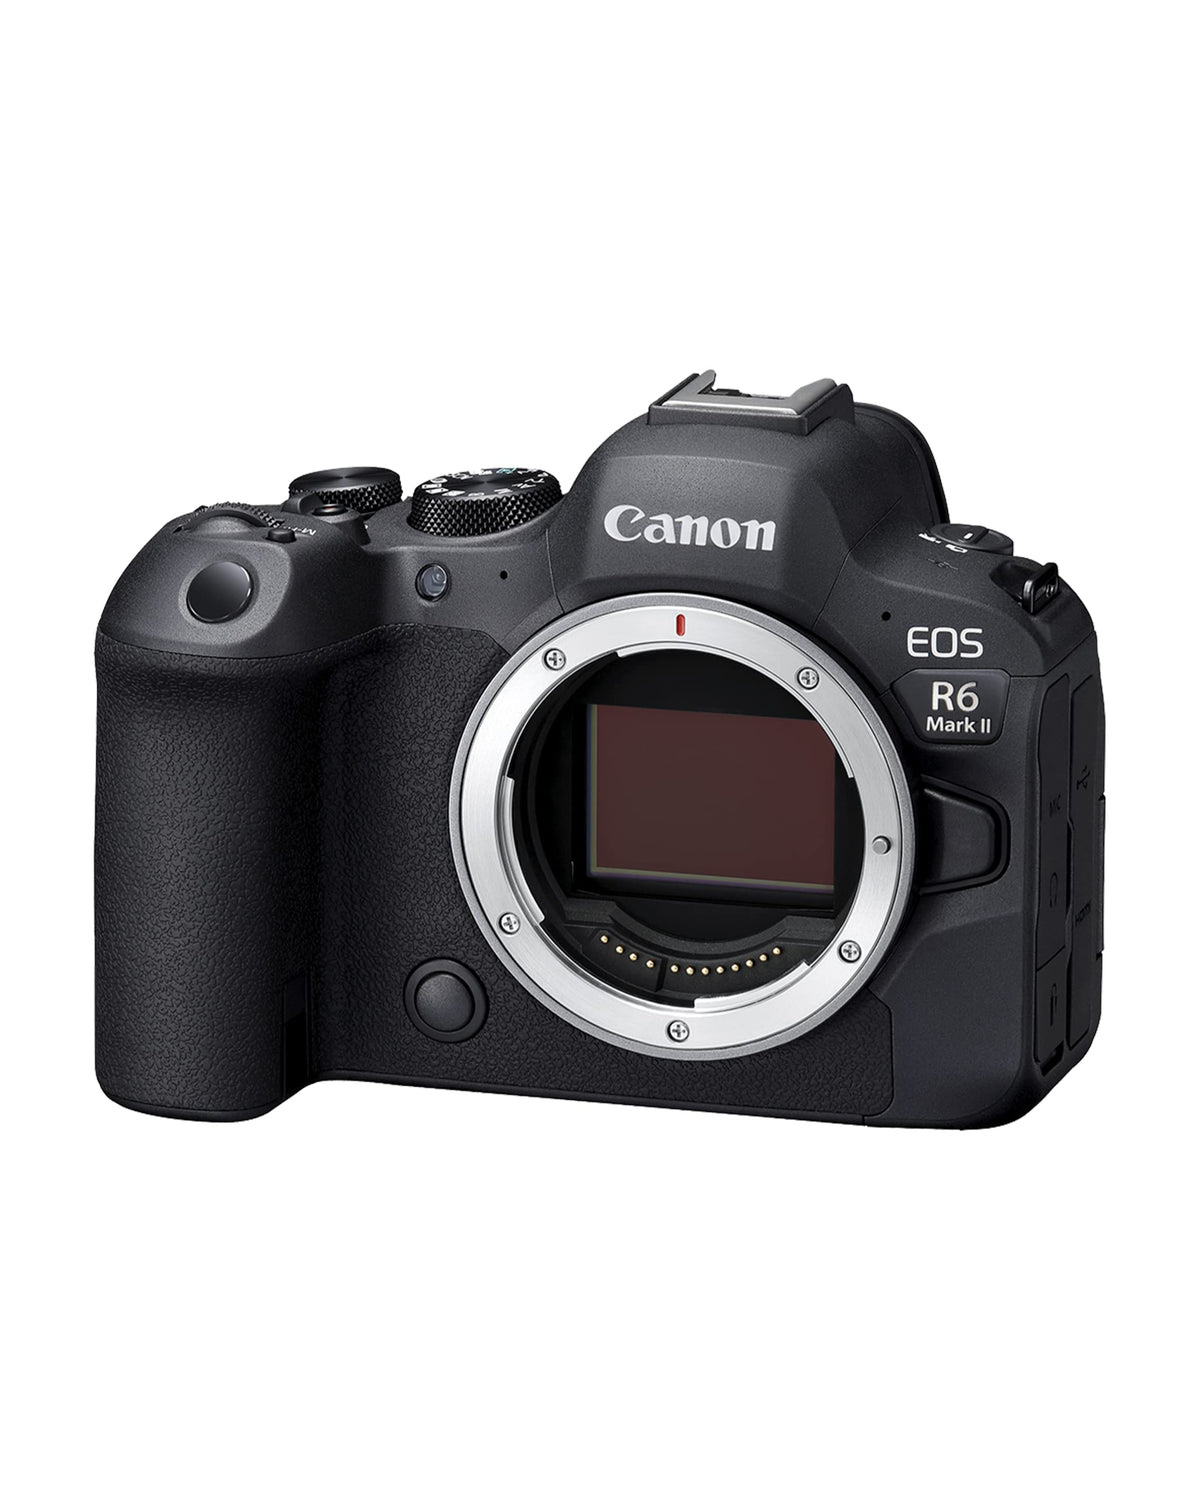 Canon EOS R6 Mark II - Full Frame Mirrorless Camera (Body Only) - Still &amp; Video - 24.2MP, CMOS, Continuous Shooting - DIGIC X Image Processing - 6K Video Oversampling - Advanced Subject Detection